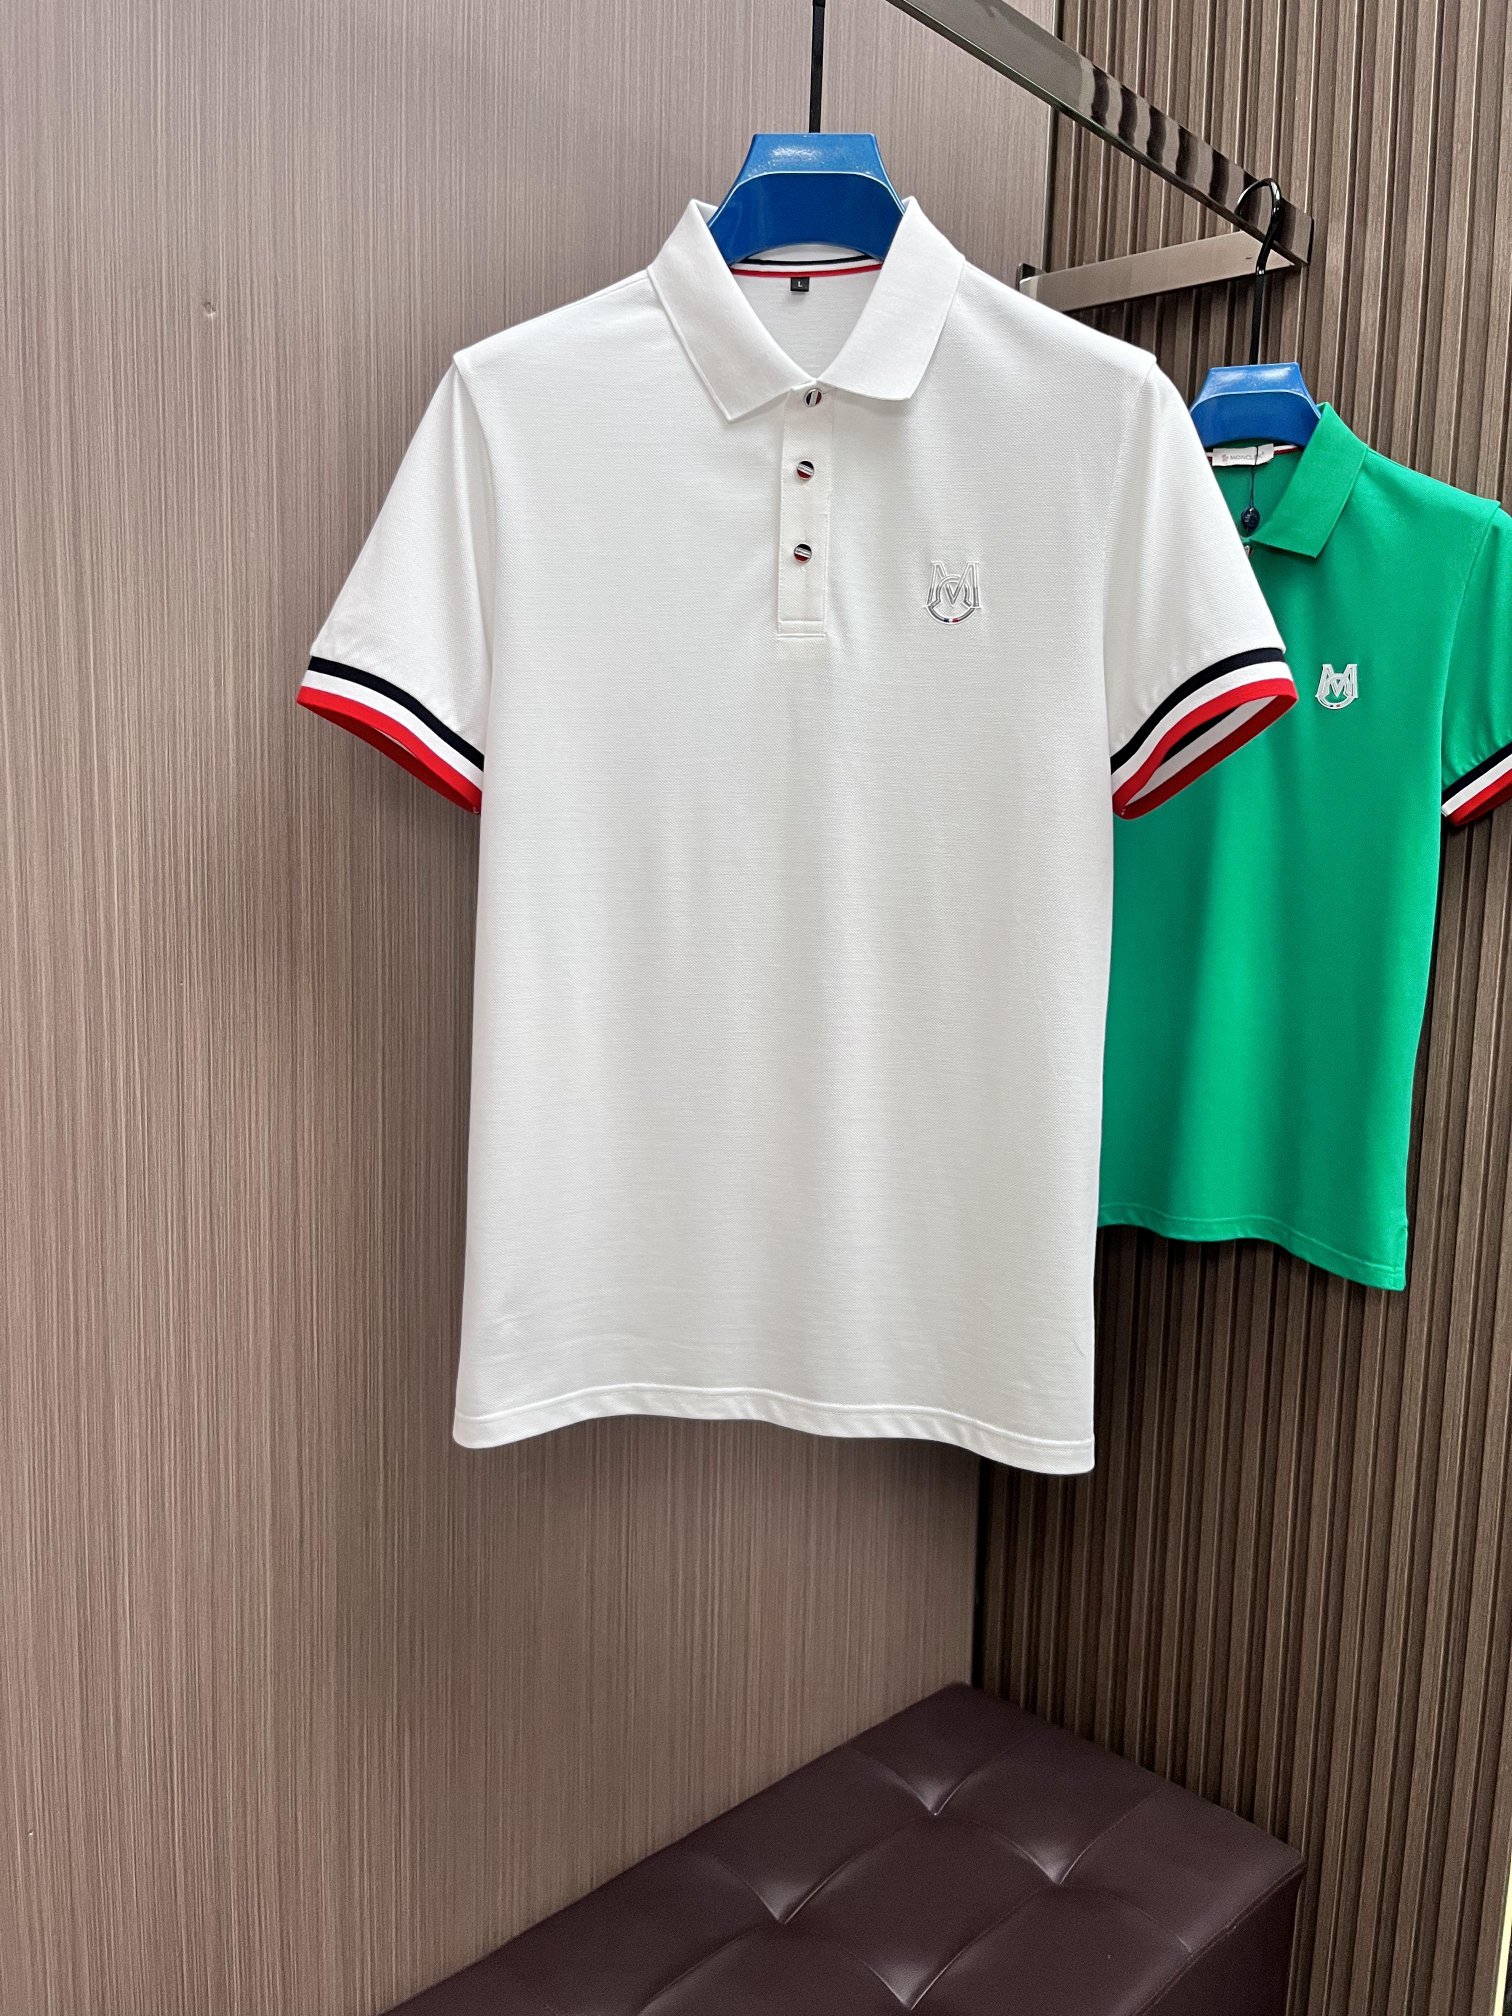 Moncler Clothing Polo T-Shirt Fashion Designer
 Embroidery Spring/Summer Collection Short Sleeve